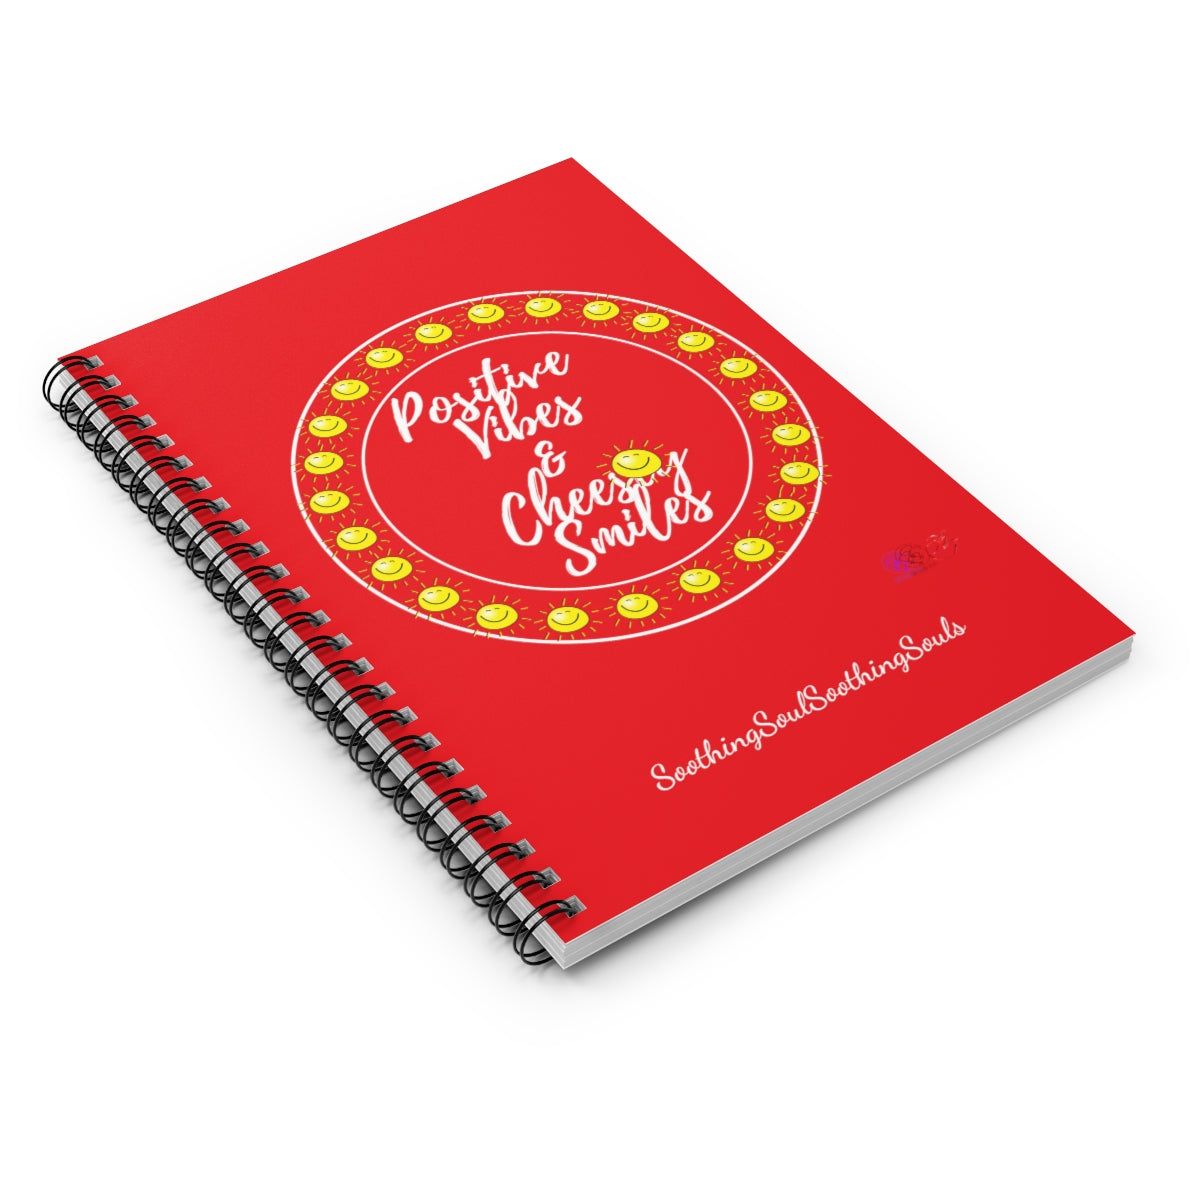 SSSS Positive Vibes & Cheesey Smiles Notebook Red (WL)